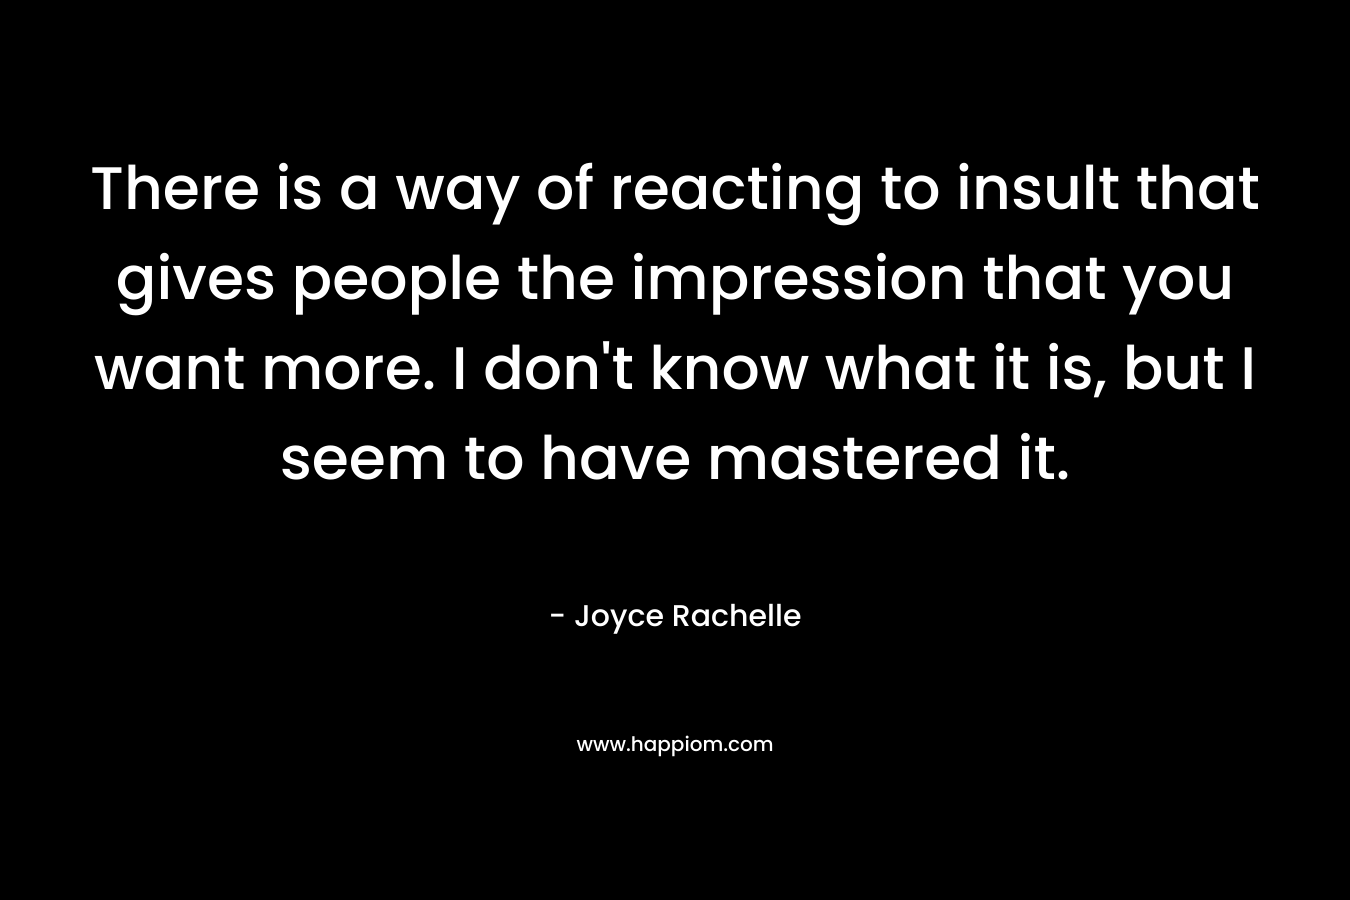 There is a way of reacting to insult that gives people the impression that you want more. I don’t know what it is, but I seem to have mastered it. – Joyce Rachelle